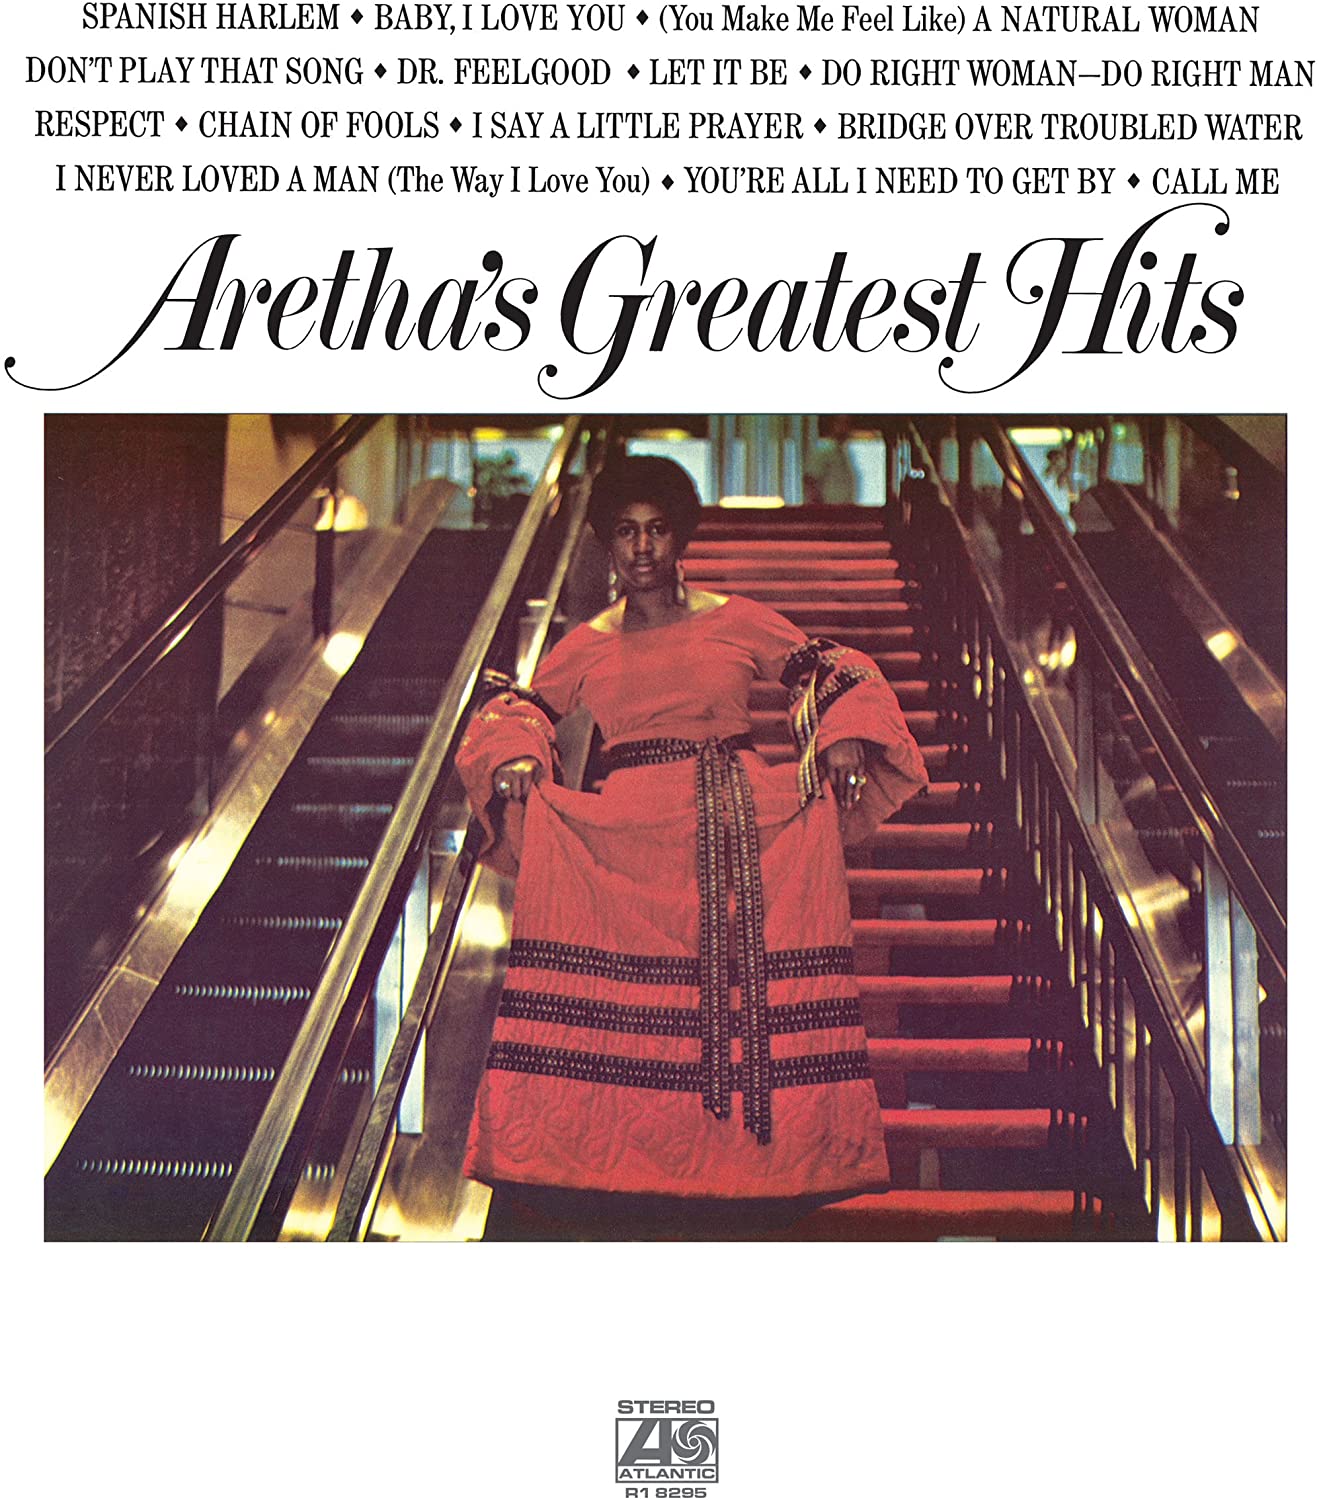 'Aretha's Greatest Hits', the classic Atlantic compilation released on Vinyl in 1971, includes Aretha's big hits like 'Respect', 'I Say a Little Prayer' and 'Chain of Fools' and also classic pop covers, such as 'Let It Be', 'Call Me' and 'Bridge Over Troubled Water'.